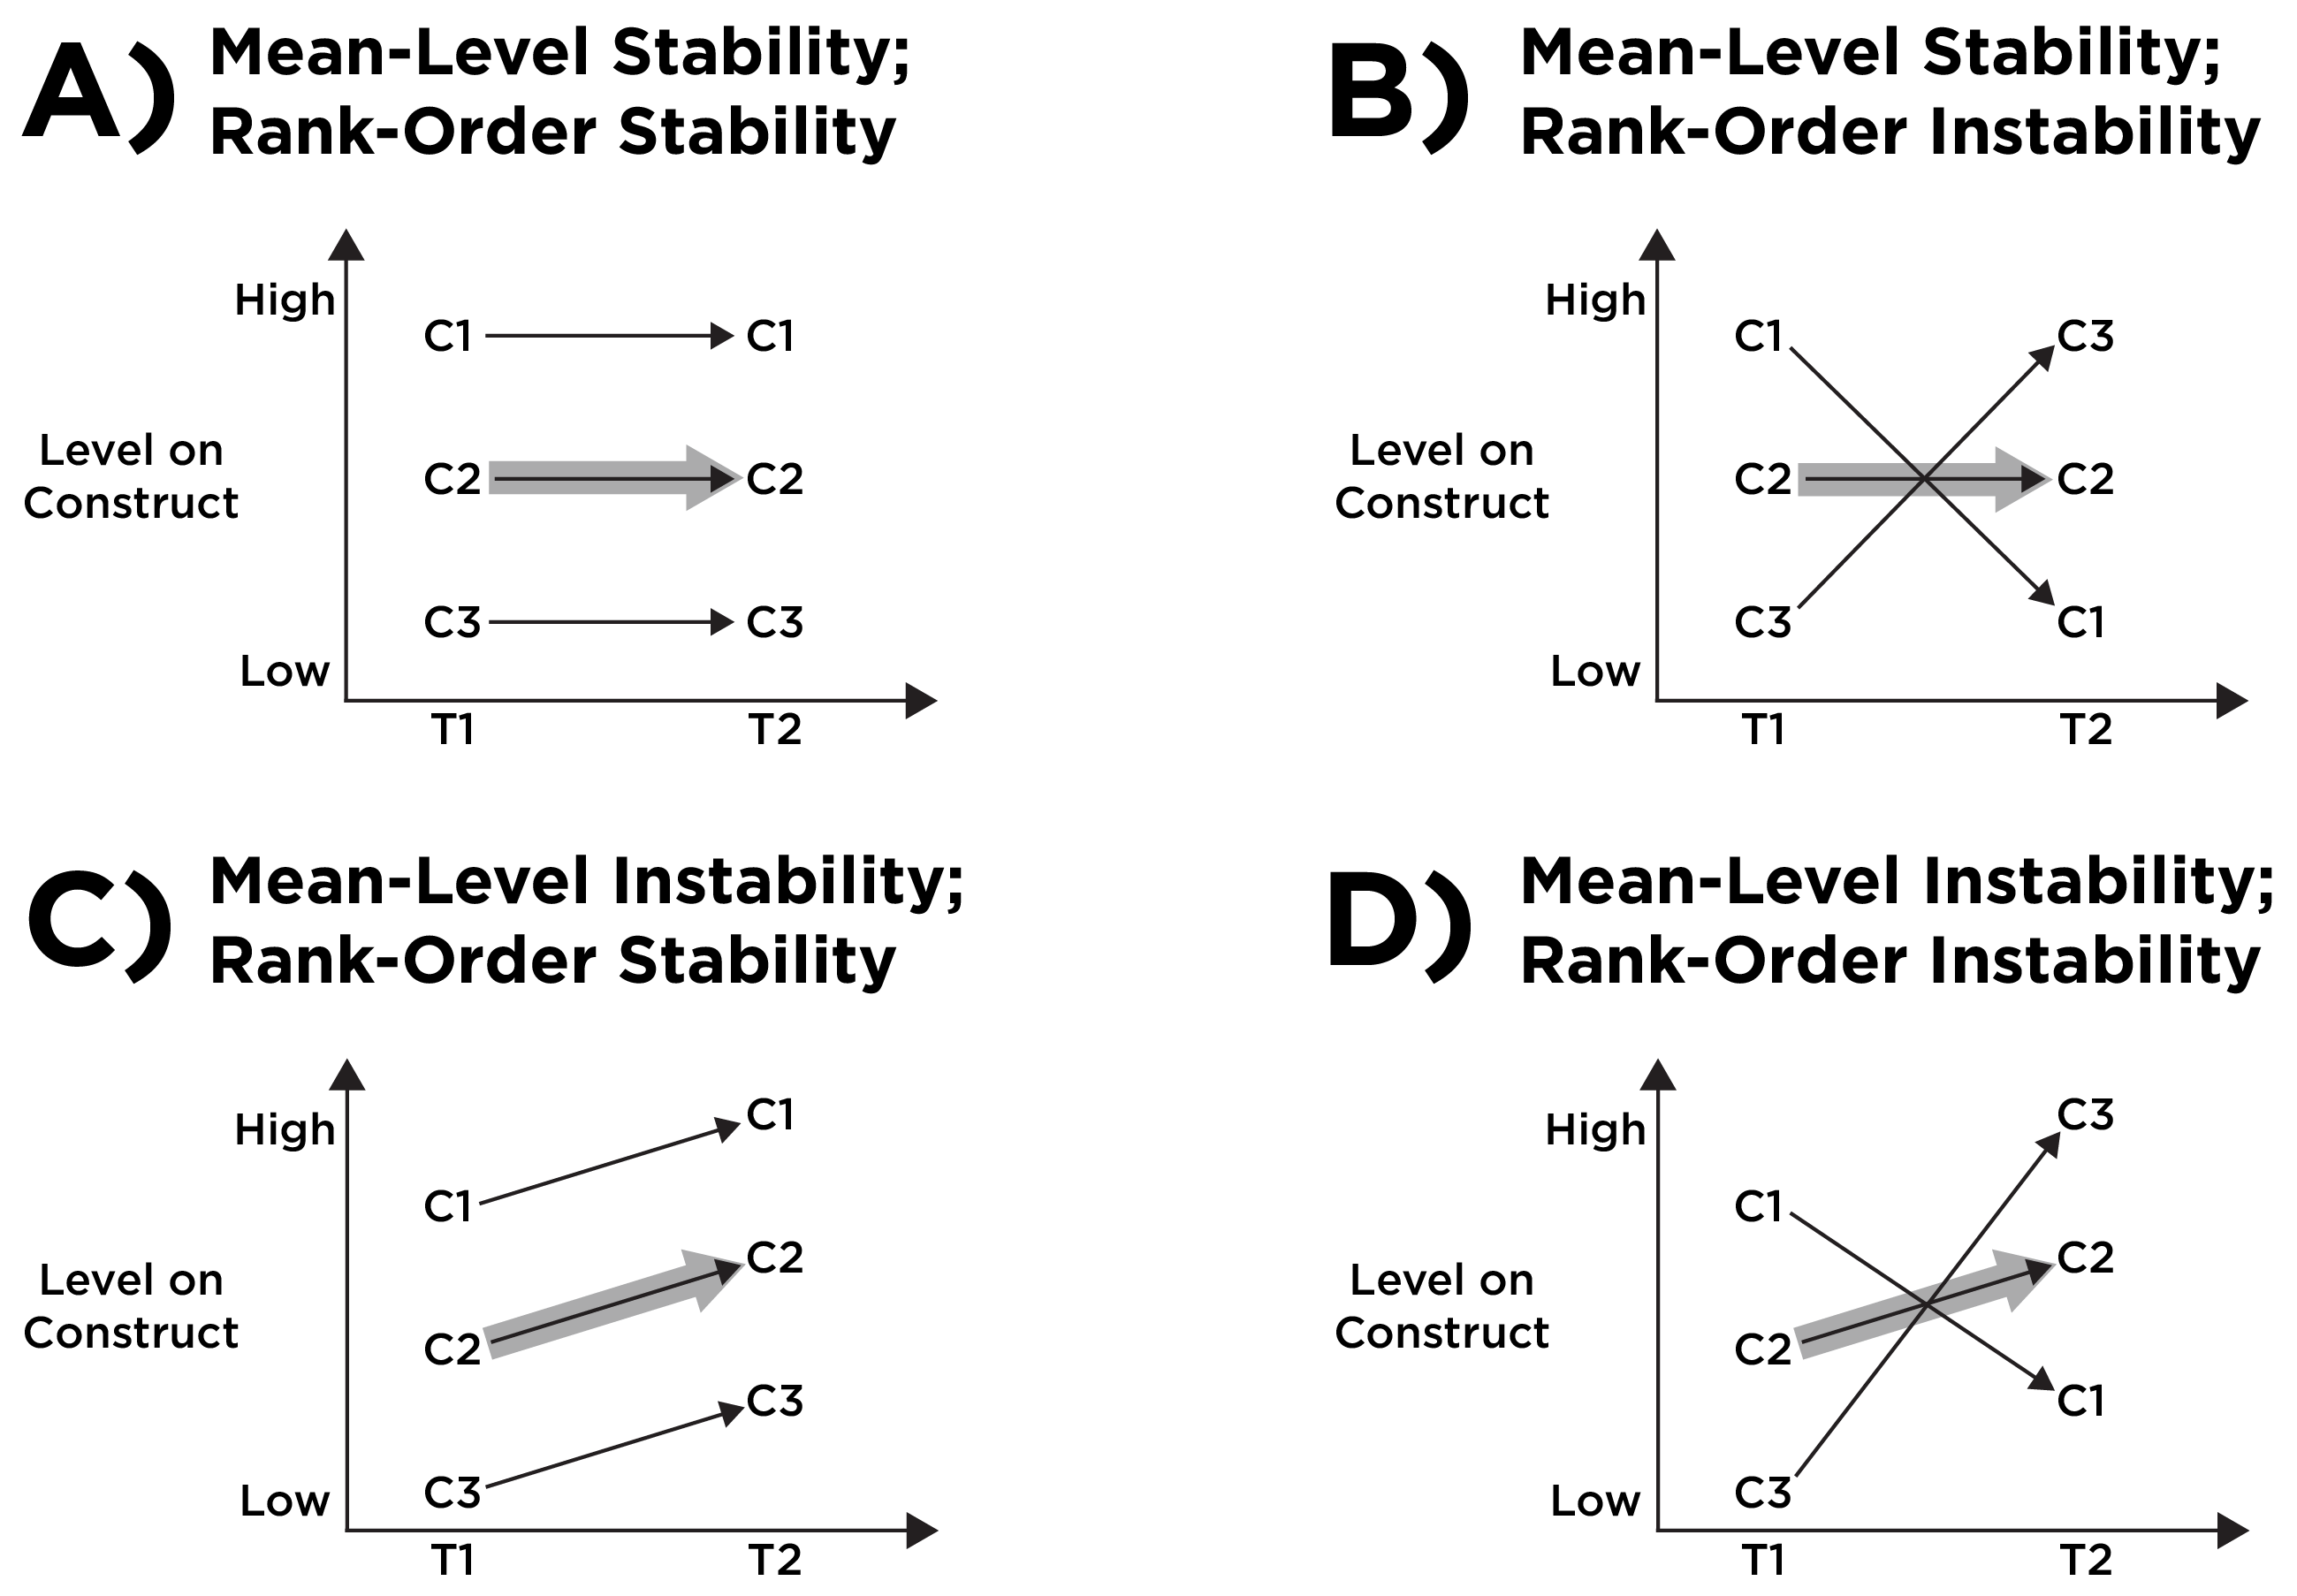 Mean-Level Stability Versus Rank-Order Stability. C1, C2, and C3 are three individual children assessed at two timepoints: T1 and T2. The gray arrow depicts the mean (average) trajectory. (Figure reprinted from Petersen (in press), Figure 1, Petersen, I. T. (in press). Reexamining developmental continuity and discontinuity in the 21st century: Better aligning behaviors, functions, and mechanisms. Developmental Psychology. https://doi.org/10.1037/dev0001657 Copyright (c) American Psychological Association. Used with permission.)